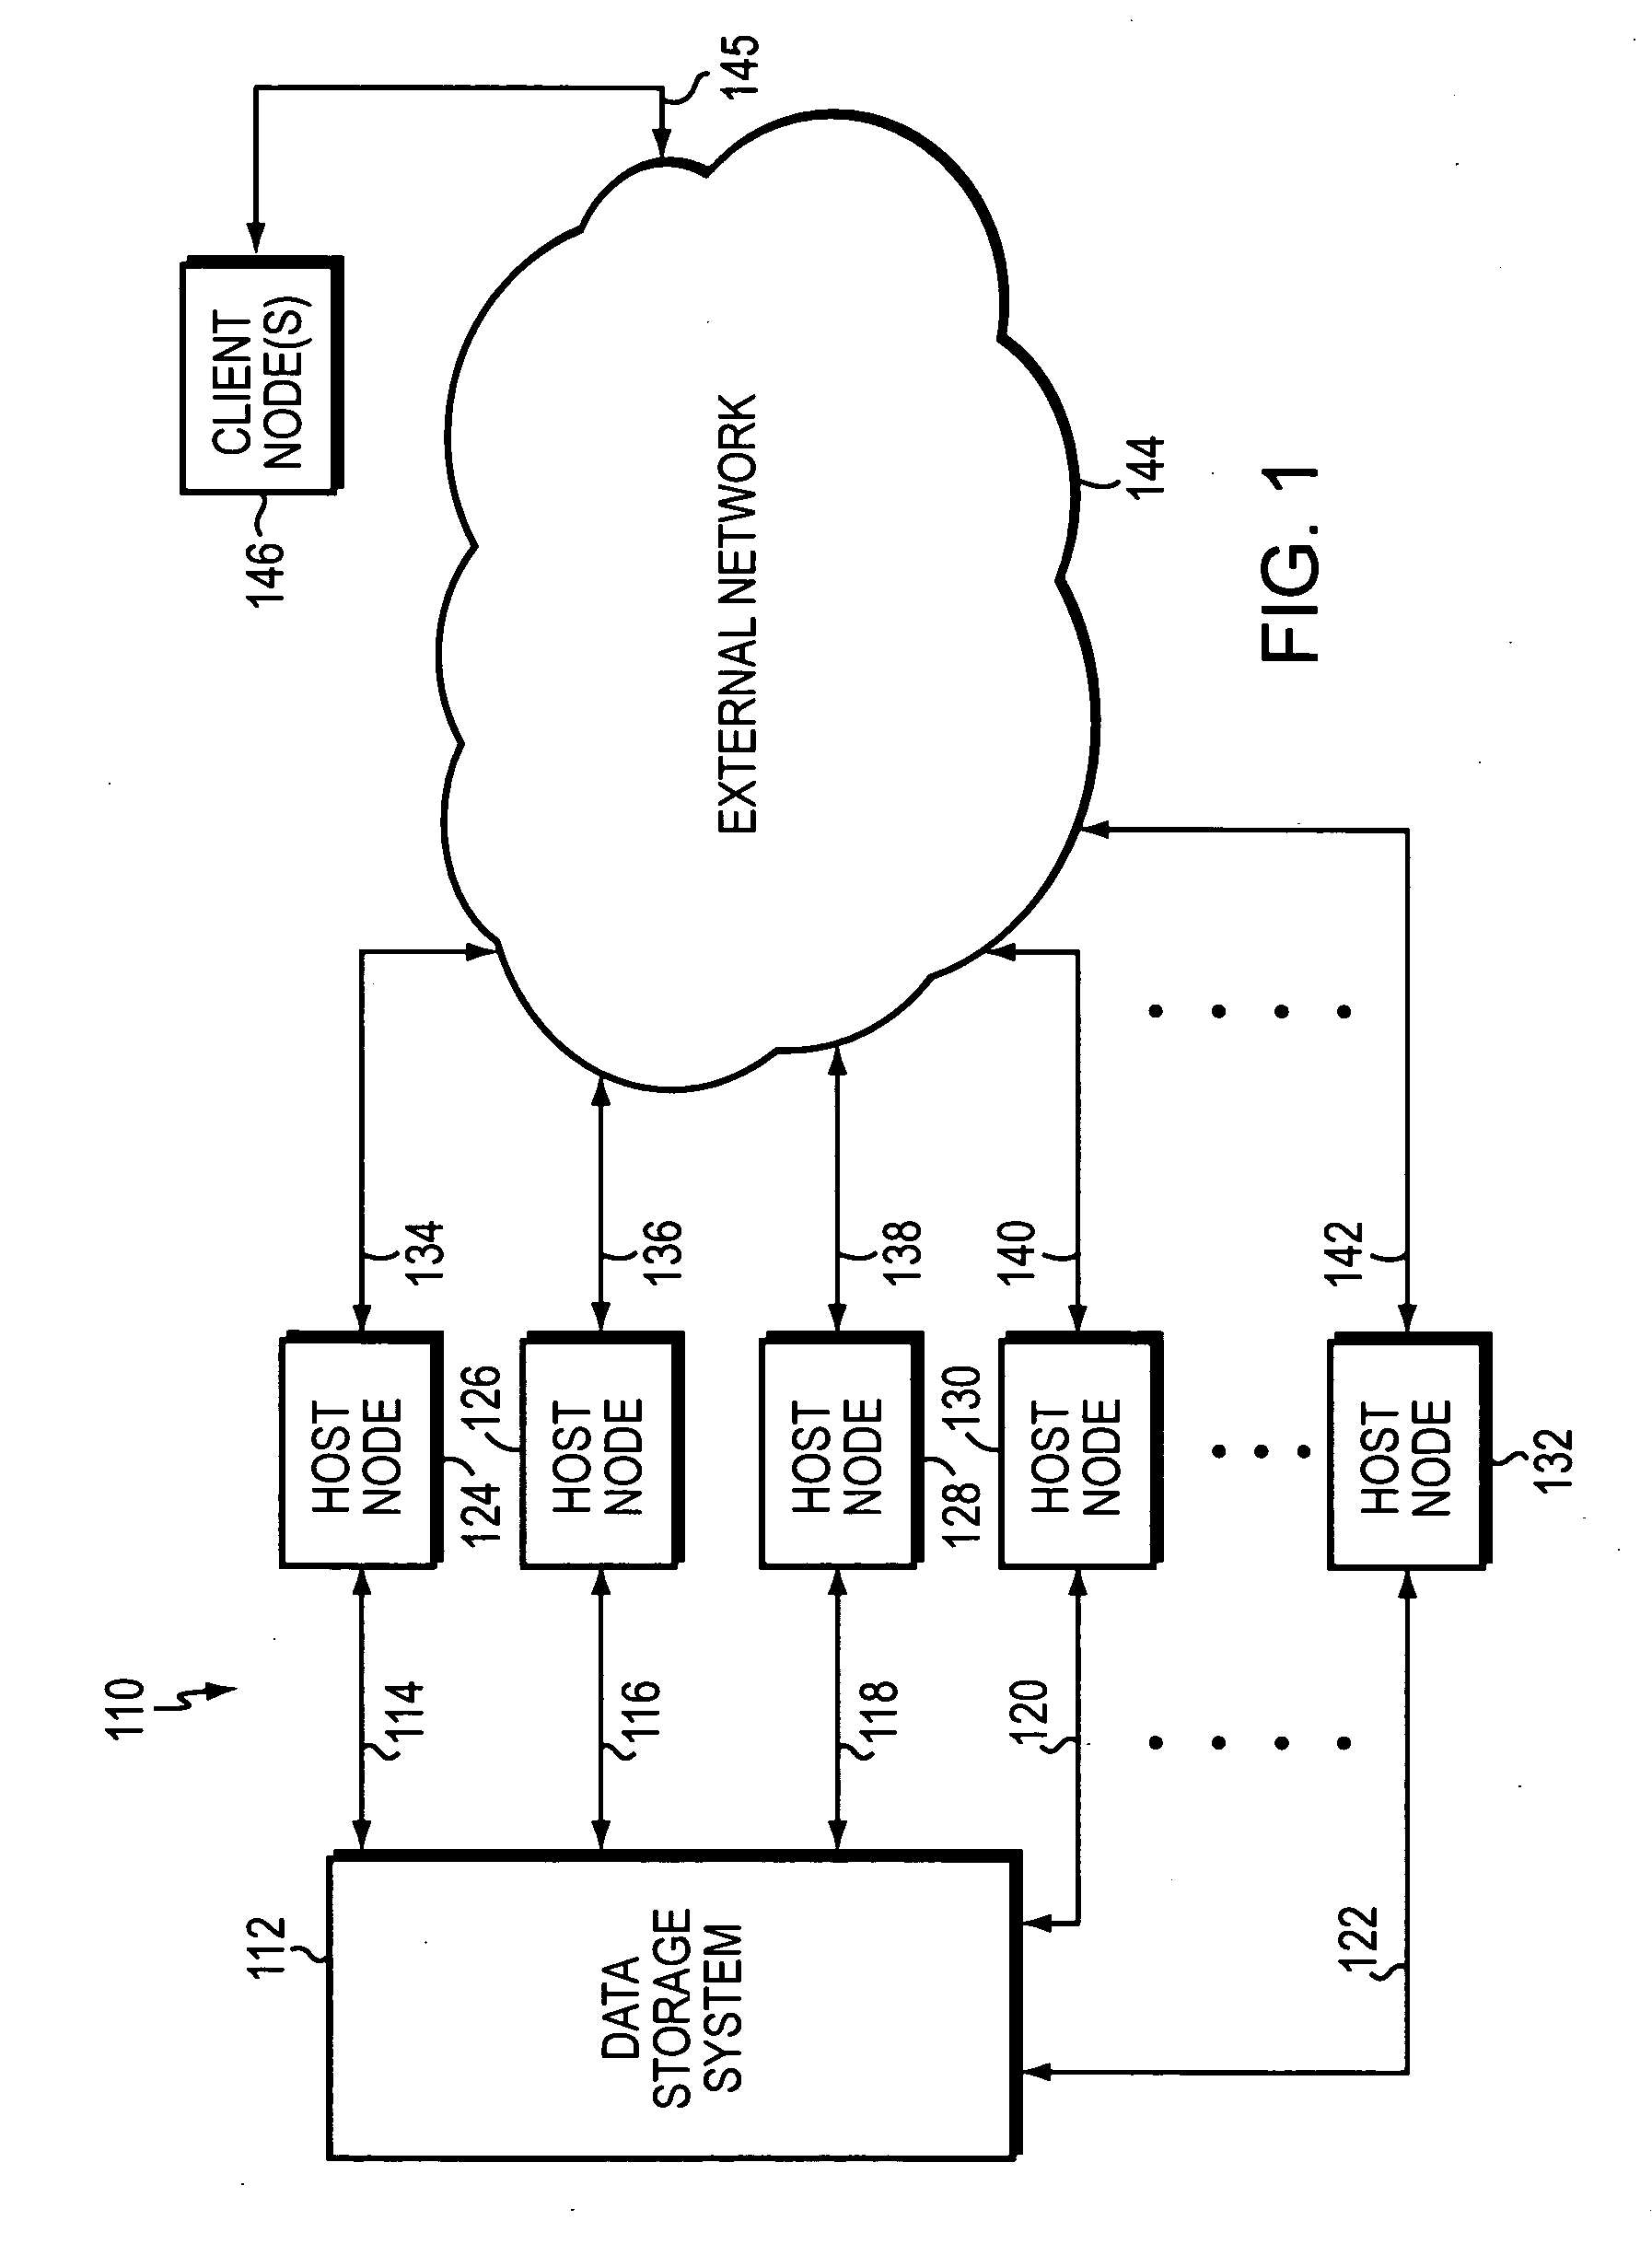 Data storage system having memory controller with embedded CPU